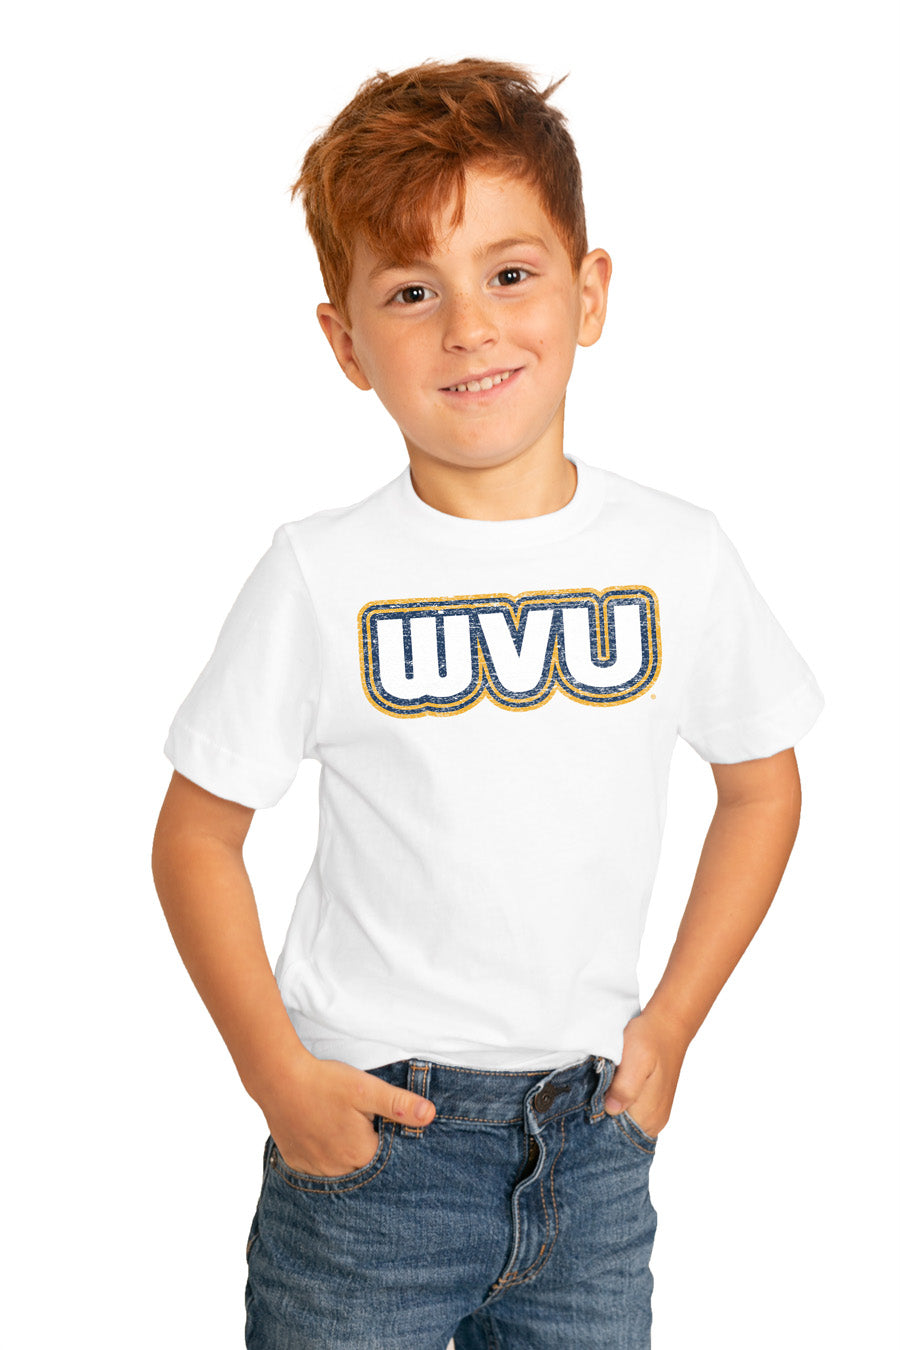 West Virginia Mountaineers  "It'S A Win" Youth Tee - Shop The Soho